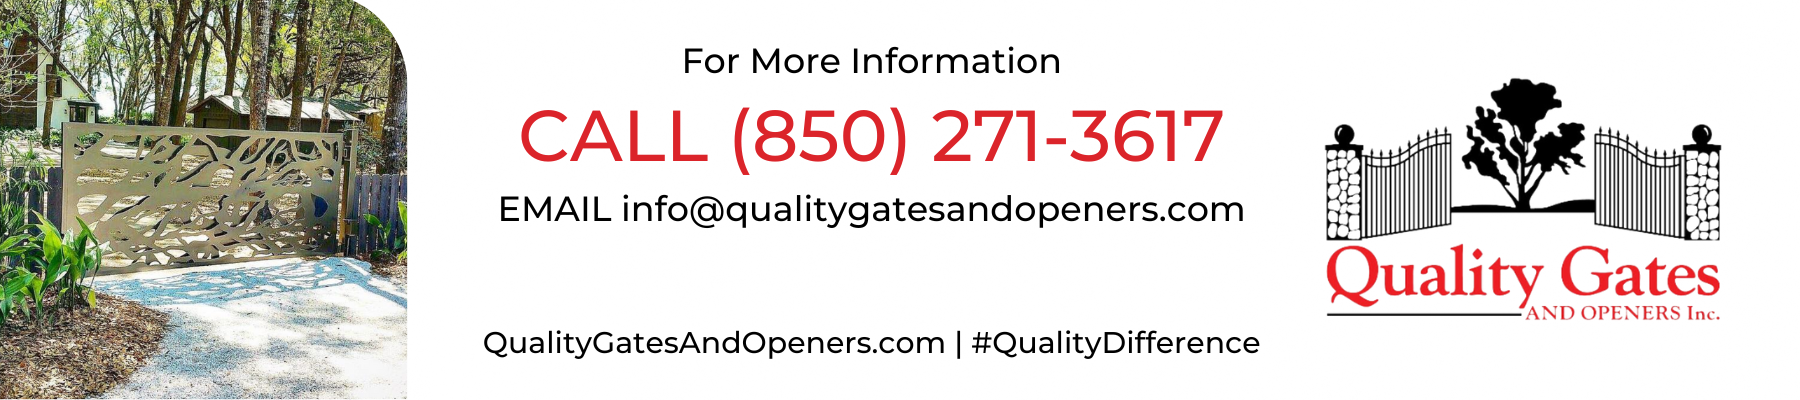 For More Information Call Quality Gates And Openers at 850-271-3617